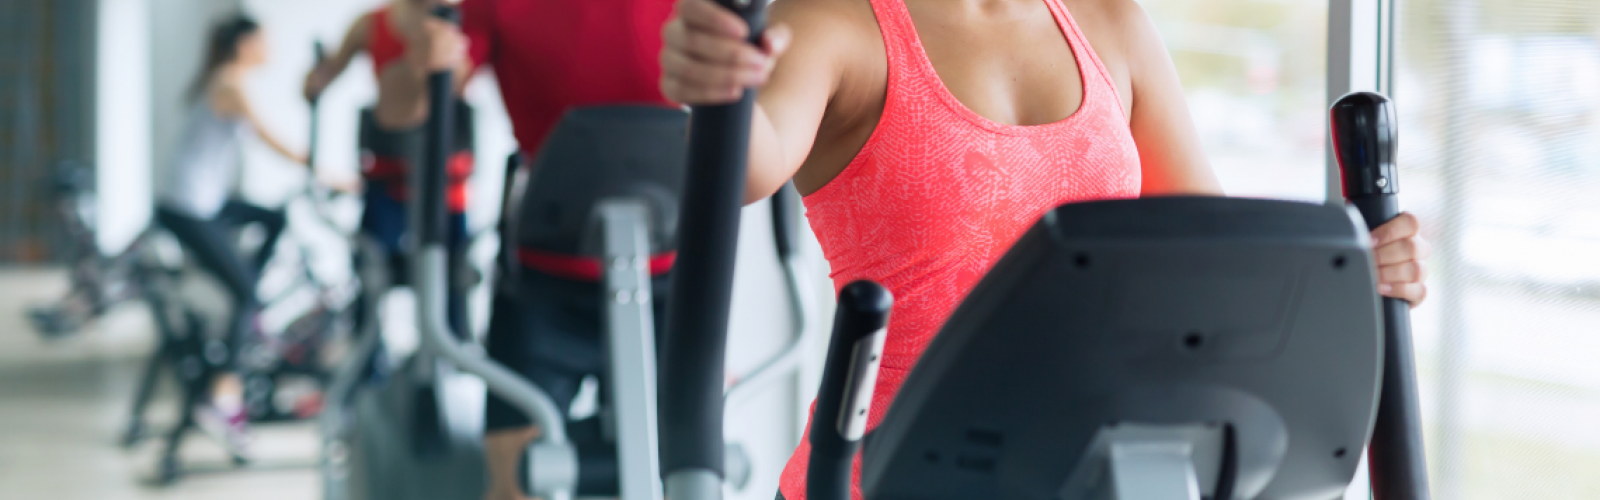 Kickstart your workout with the elliptical